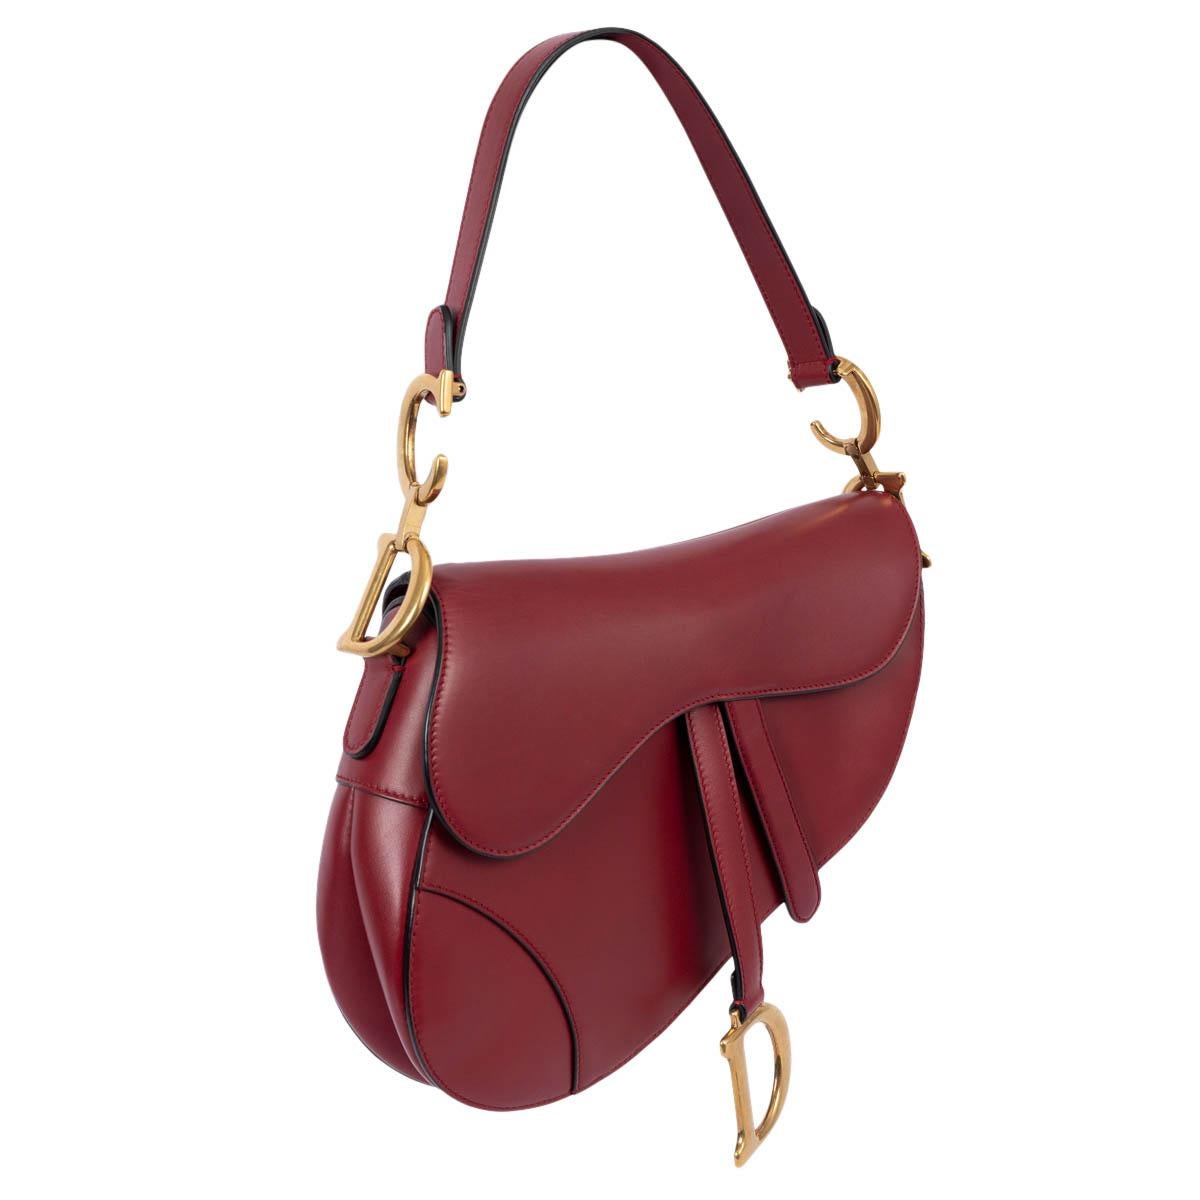 100% authentic Christian Dior Saddle bag in burgundy smooth calfskin. The legendary design features a Saddle flap with a D stirrup strap and magnetic pull, as well as an antique gold-finish metal CD signature on either side of the handle. The design